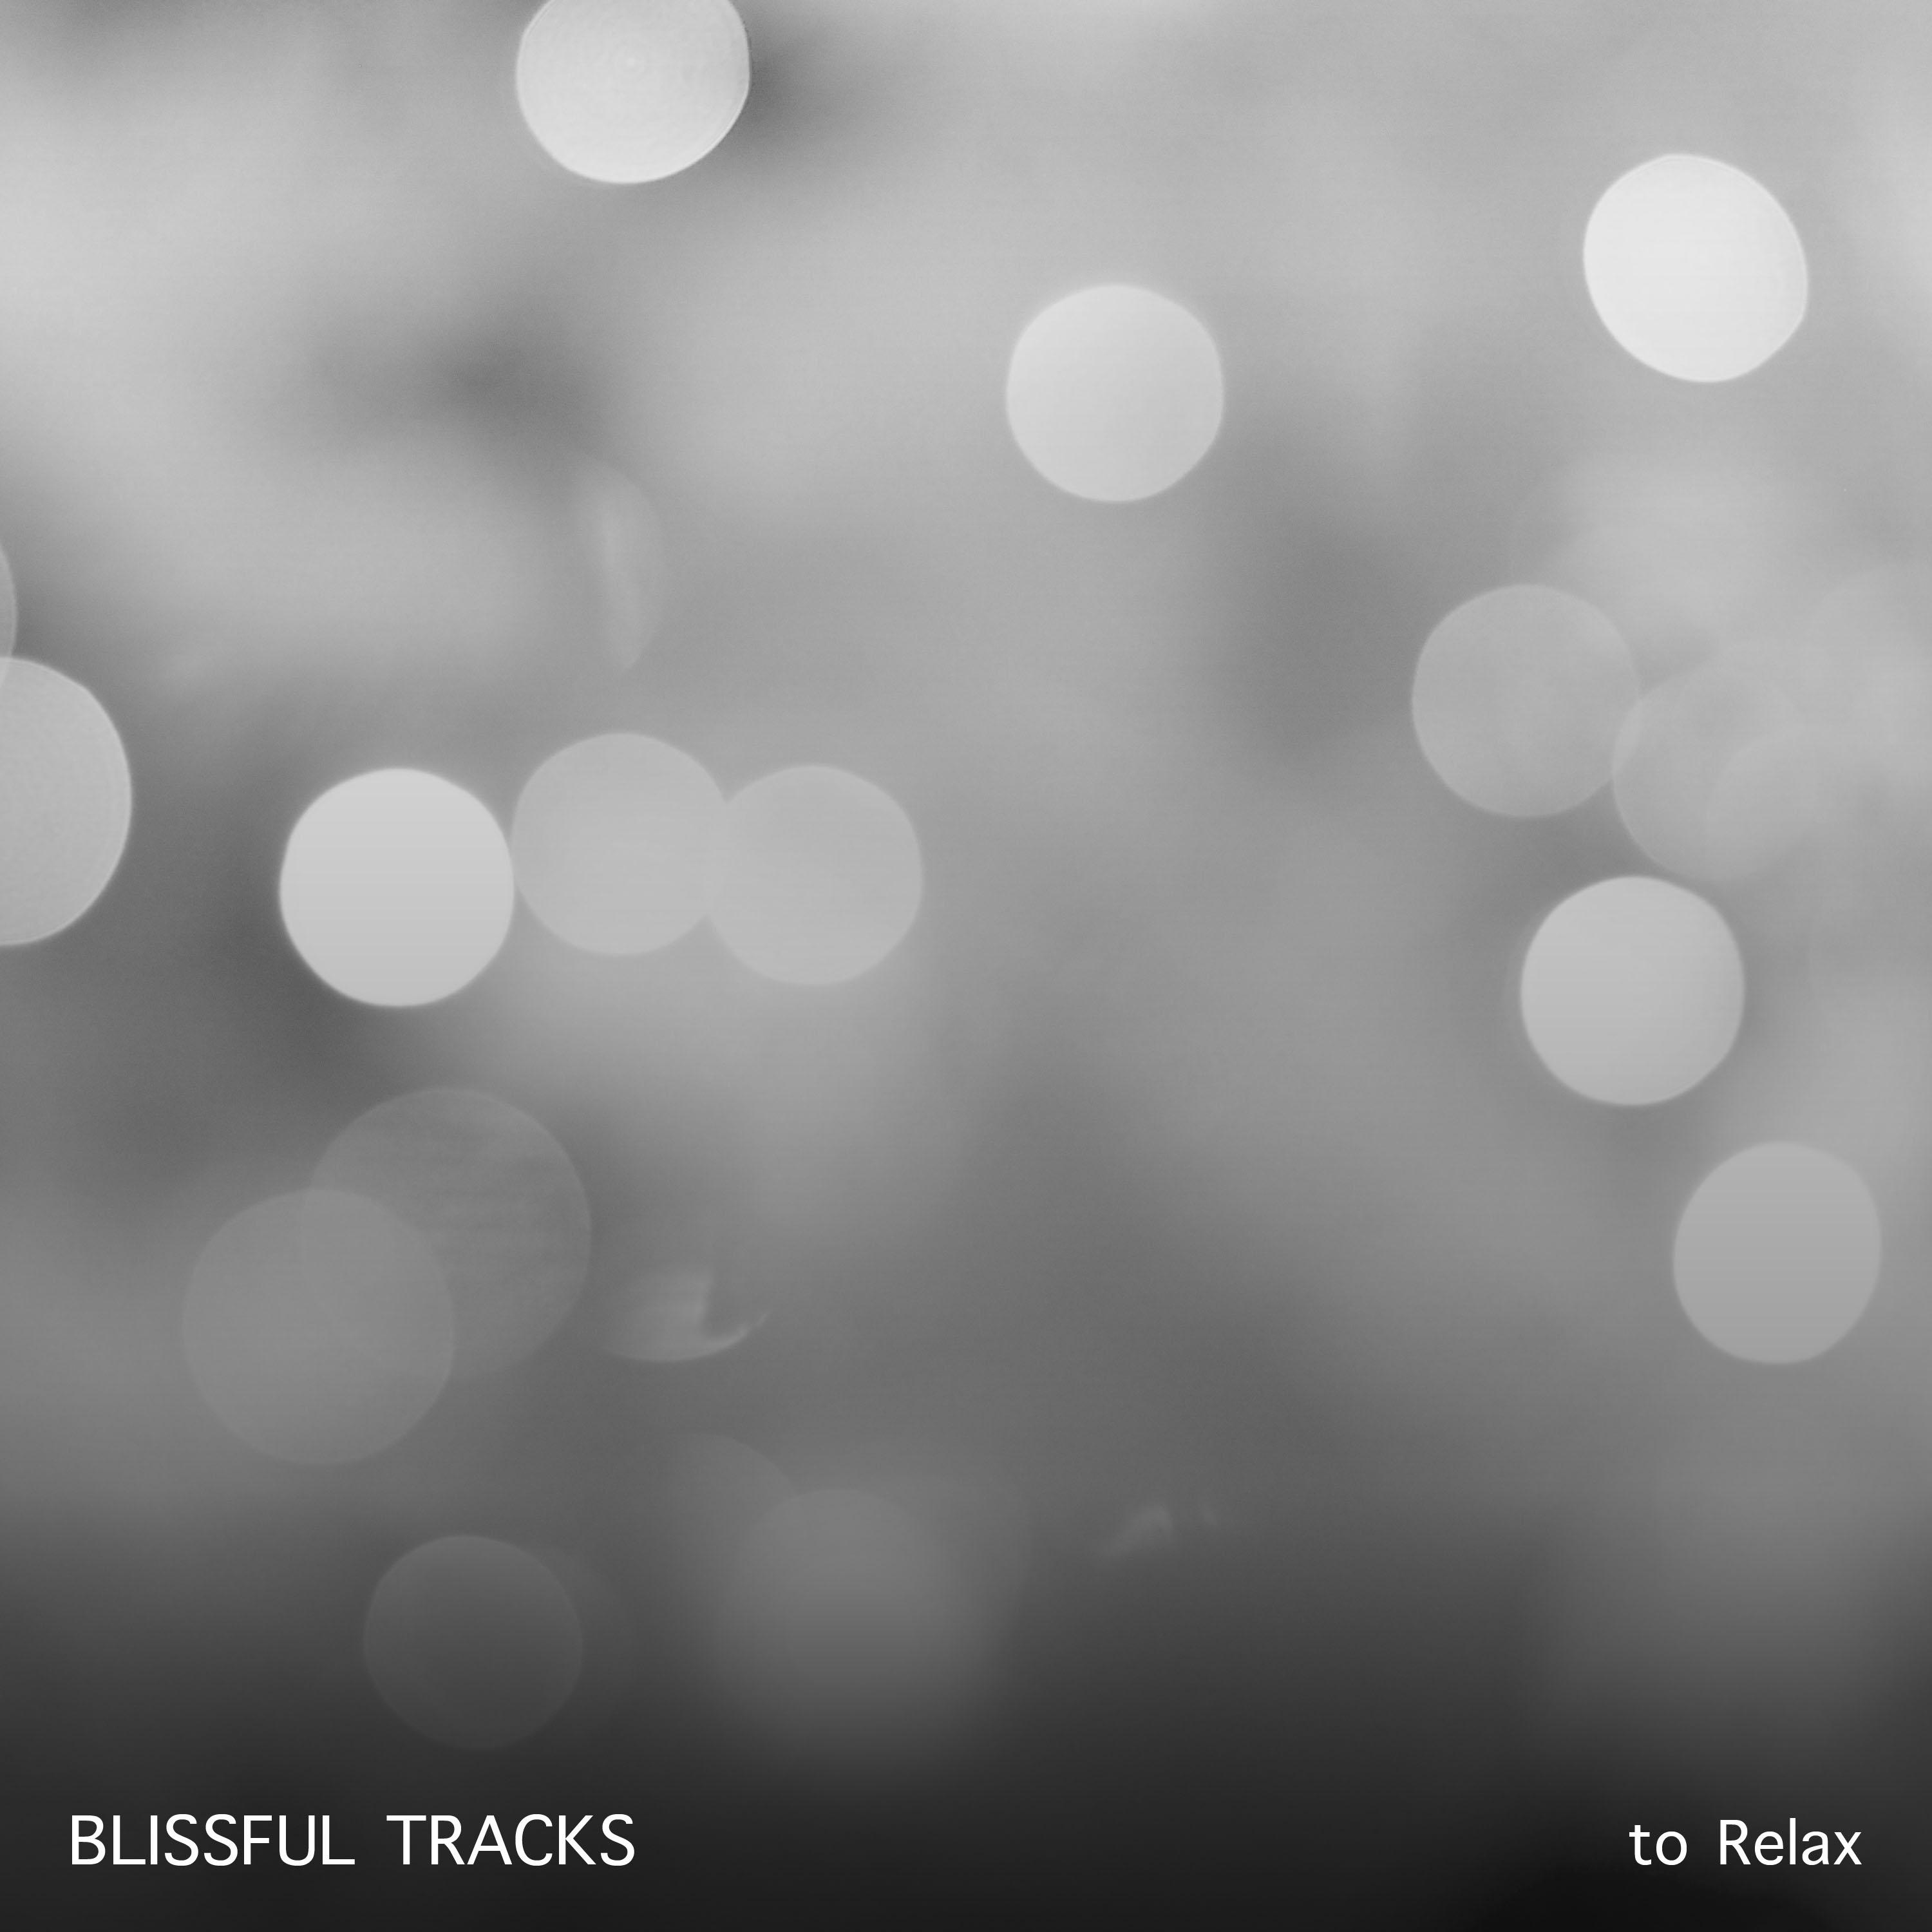 17 Blissful Tracks to Relax